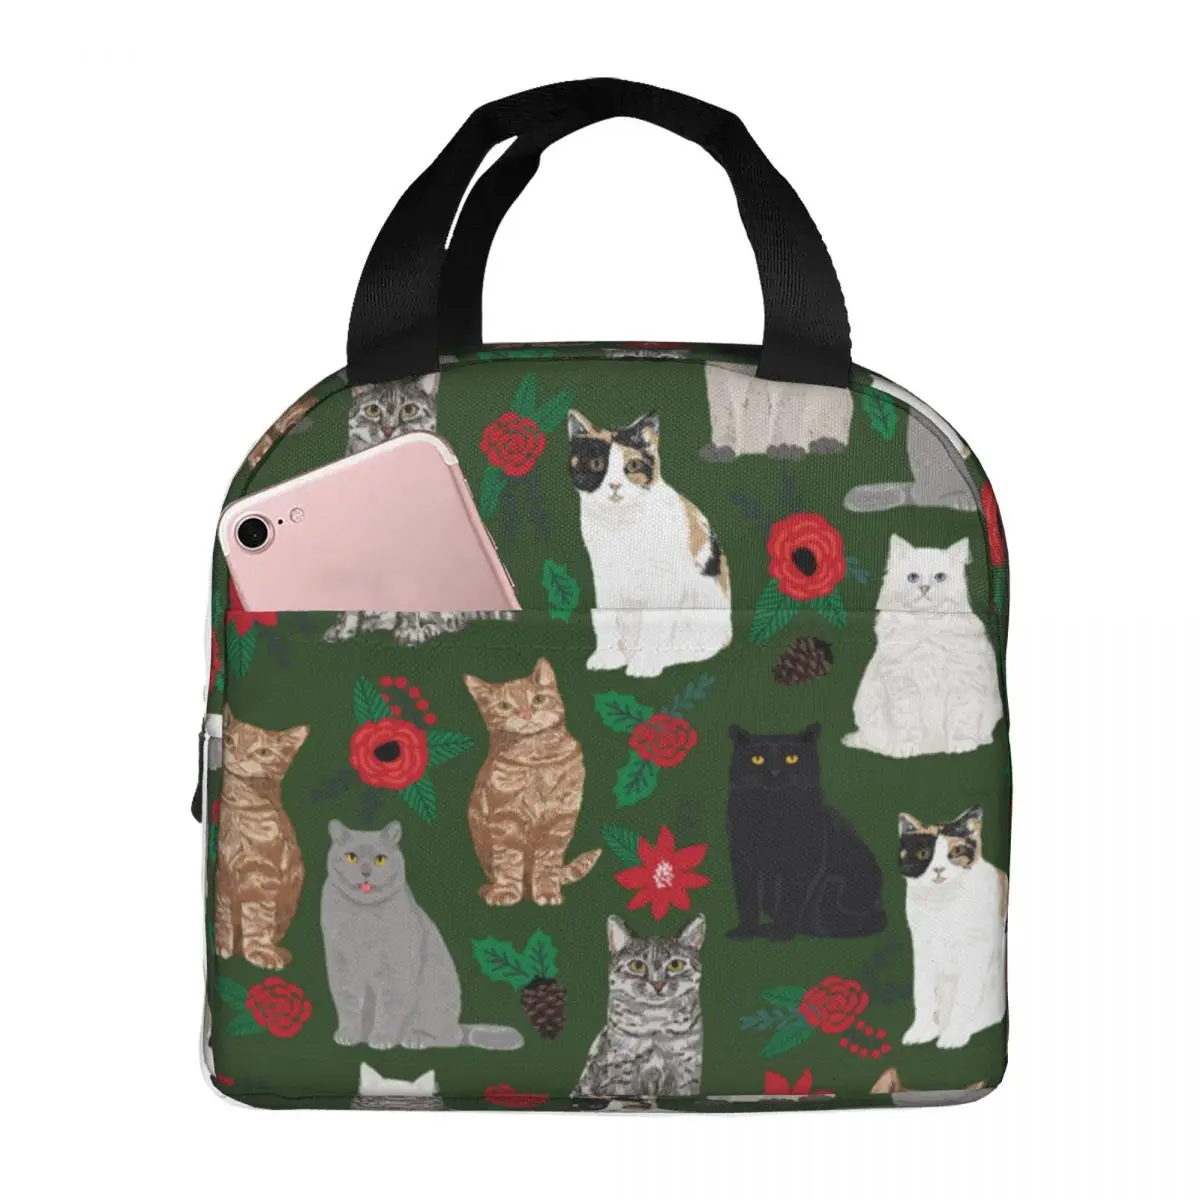 Cats Christmas Floral Lunch Bags Waterproof Insulated Canvas Cooler Bag Animal Thermal Picnic Travel Tote for Women Children